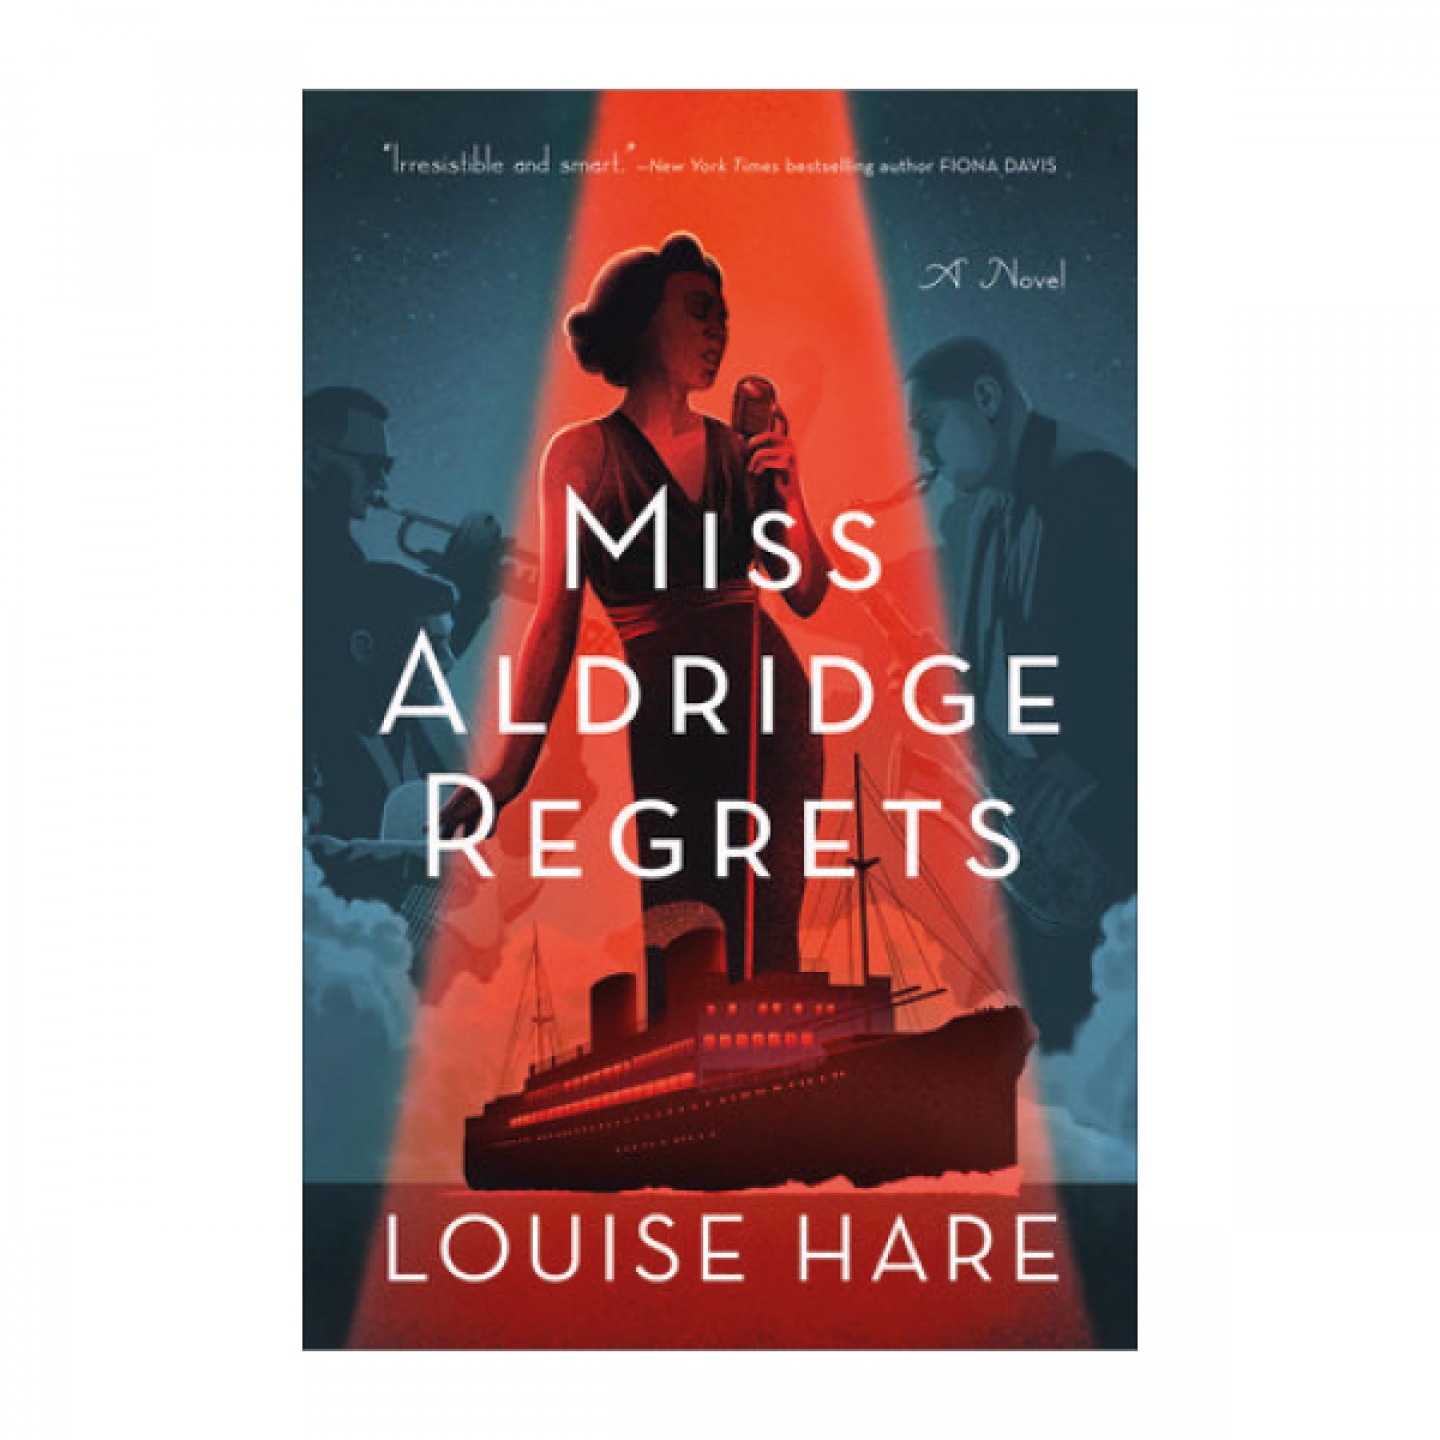 Two Books We Loved by Louise Hare and Jennette McCurdy